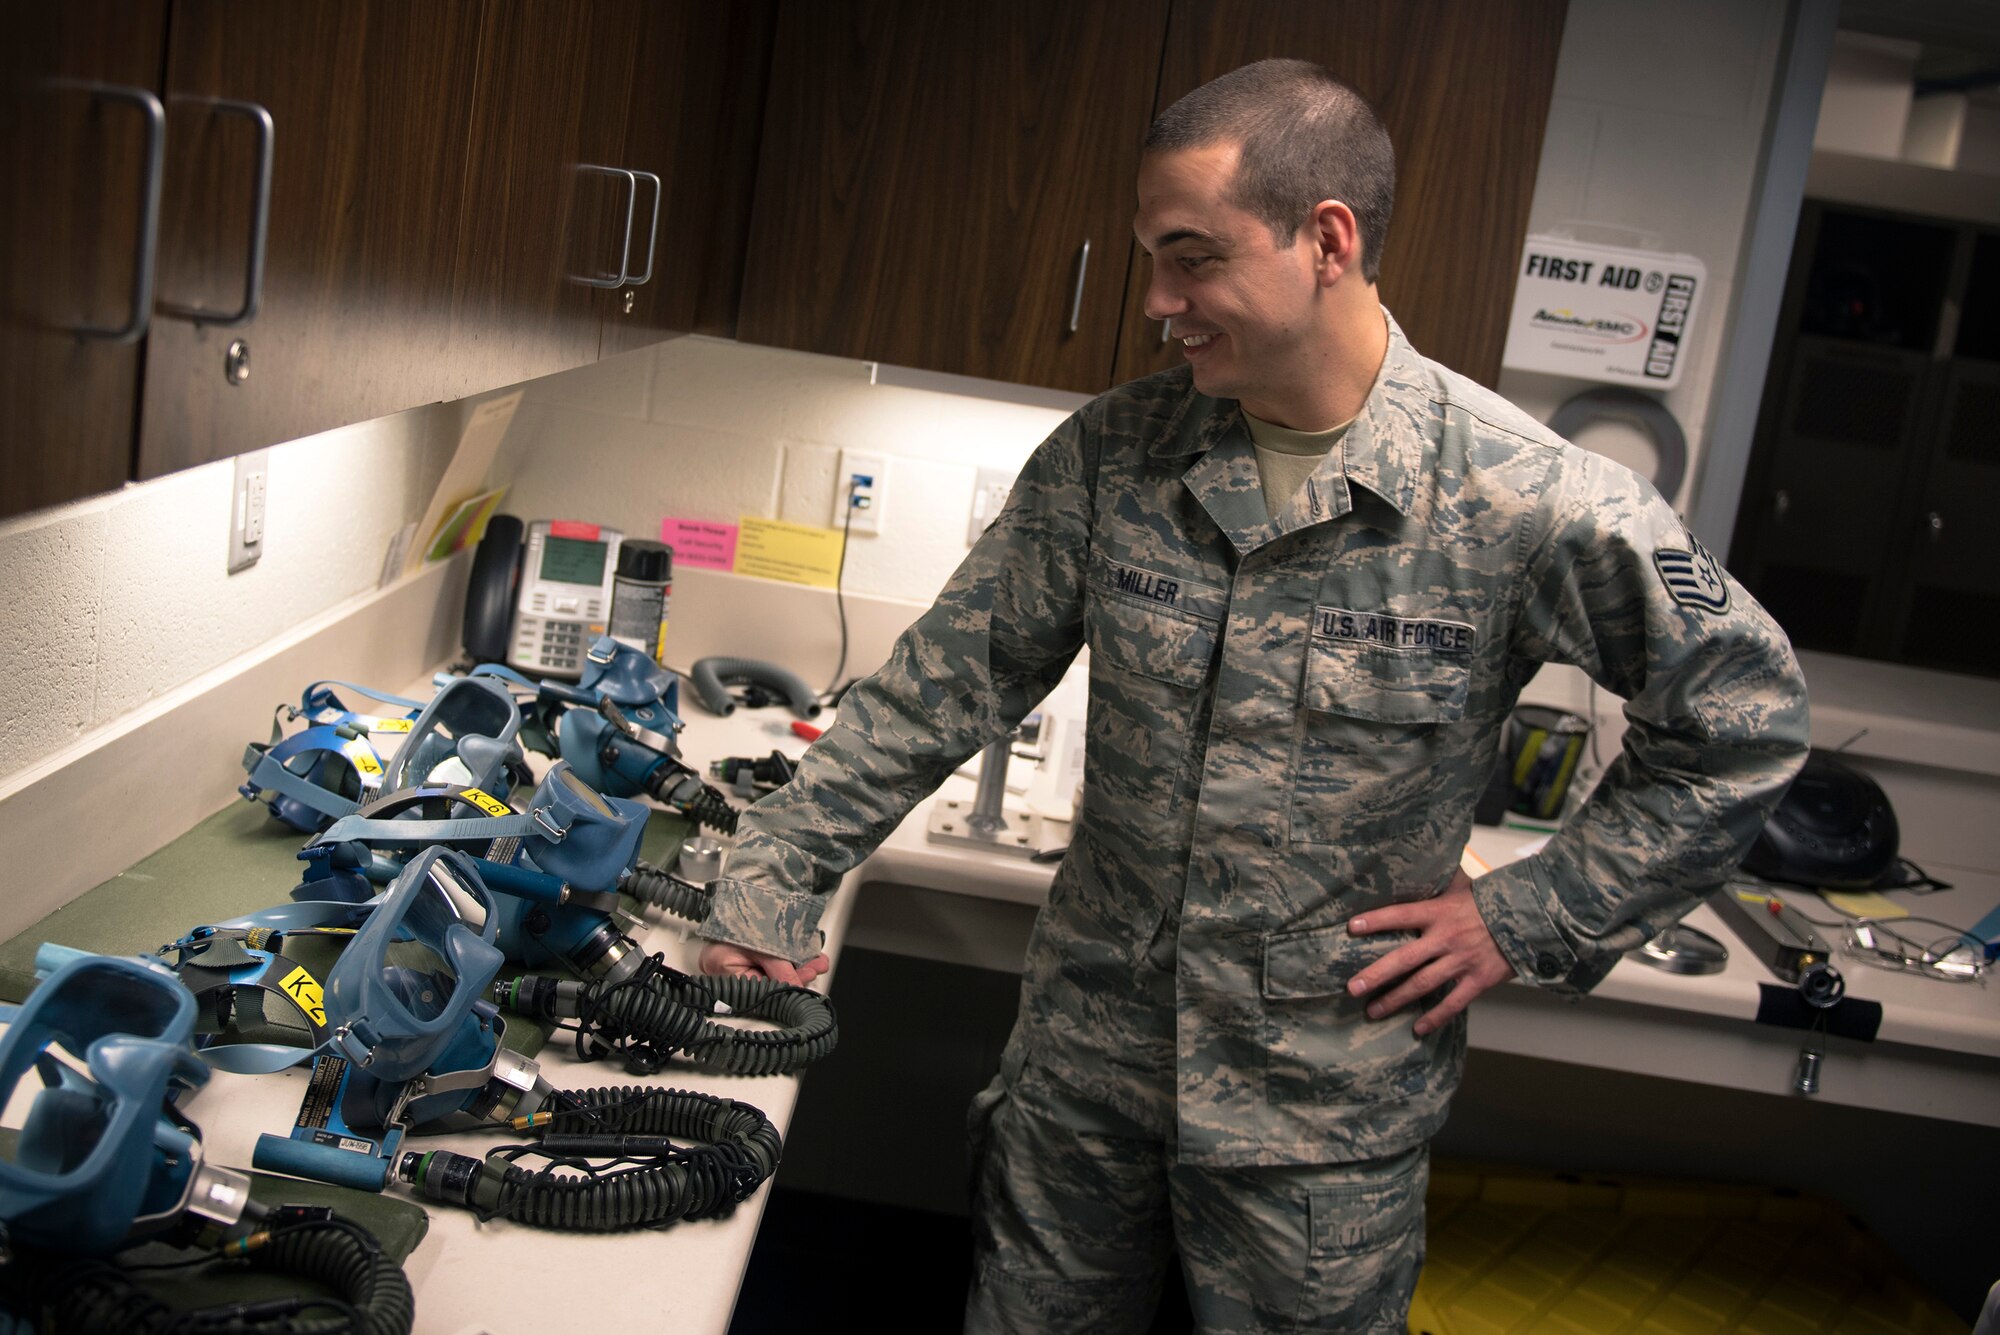 U.S. Air Force Staff Sgt. Ryan Miller, an aircrew flight equipment craftsman with the 182nd Operations Support Squadron, Illinois Air National Guard, inspects oxygen masks in Peoria, Ill., May 6, 2017. Aircrew flight equipment specialists inspect and maintain flight and survival equipment, such as helmets, parachutes and night-vision goggles. (U.S. Air National Guard photo by Tech. Sgt. Lealan Buehrer)